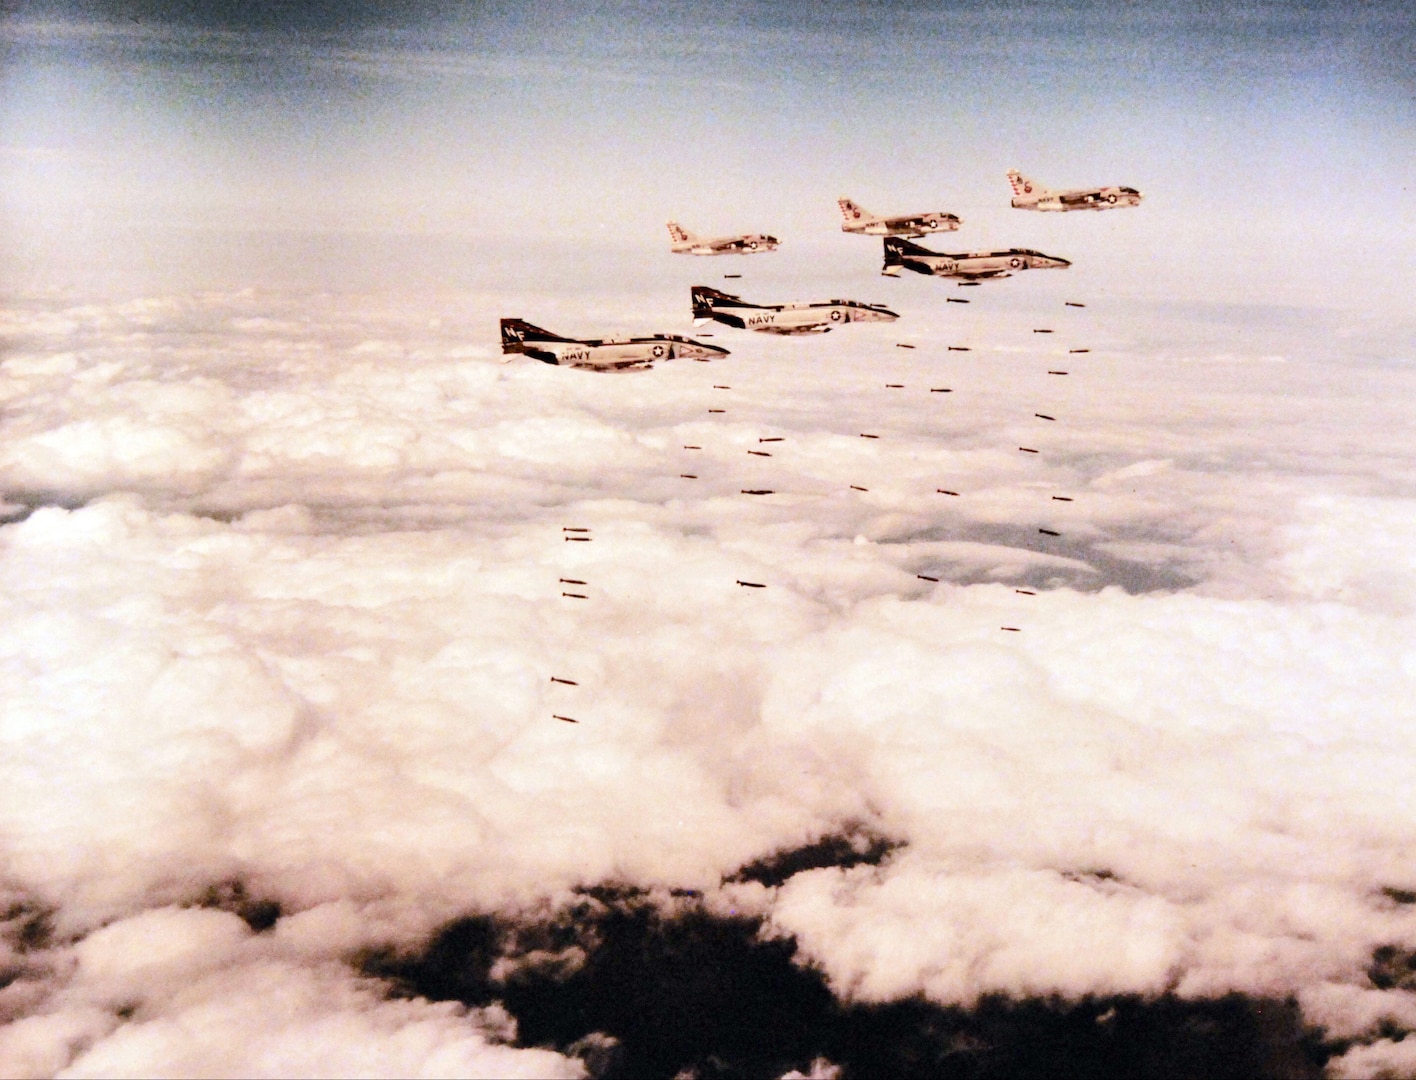 Three fighter squadron 161 Phantom II fighter aircraft from USS Midway and three Corsair II attack aircraft from USS America drop Loran bombs during
strike mission in Vietnam, March 1973 (U.S. Navy/National Archives and Records Administration/Fred P. Leonard)